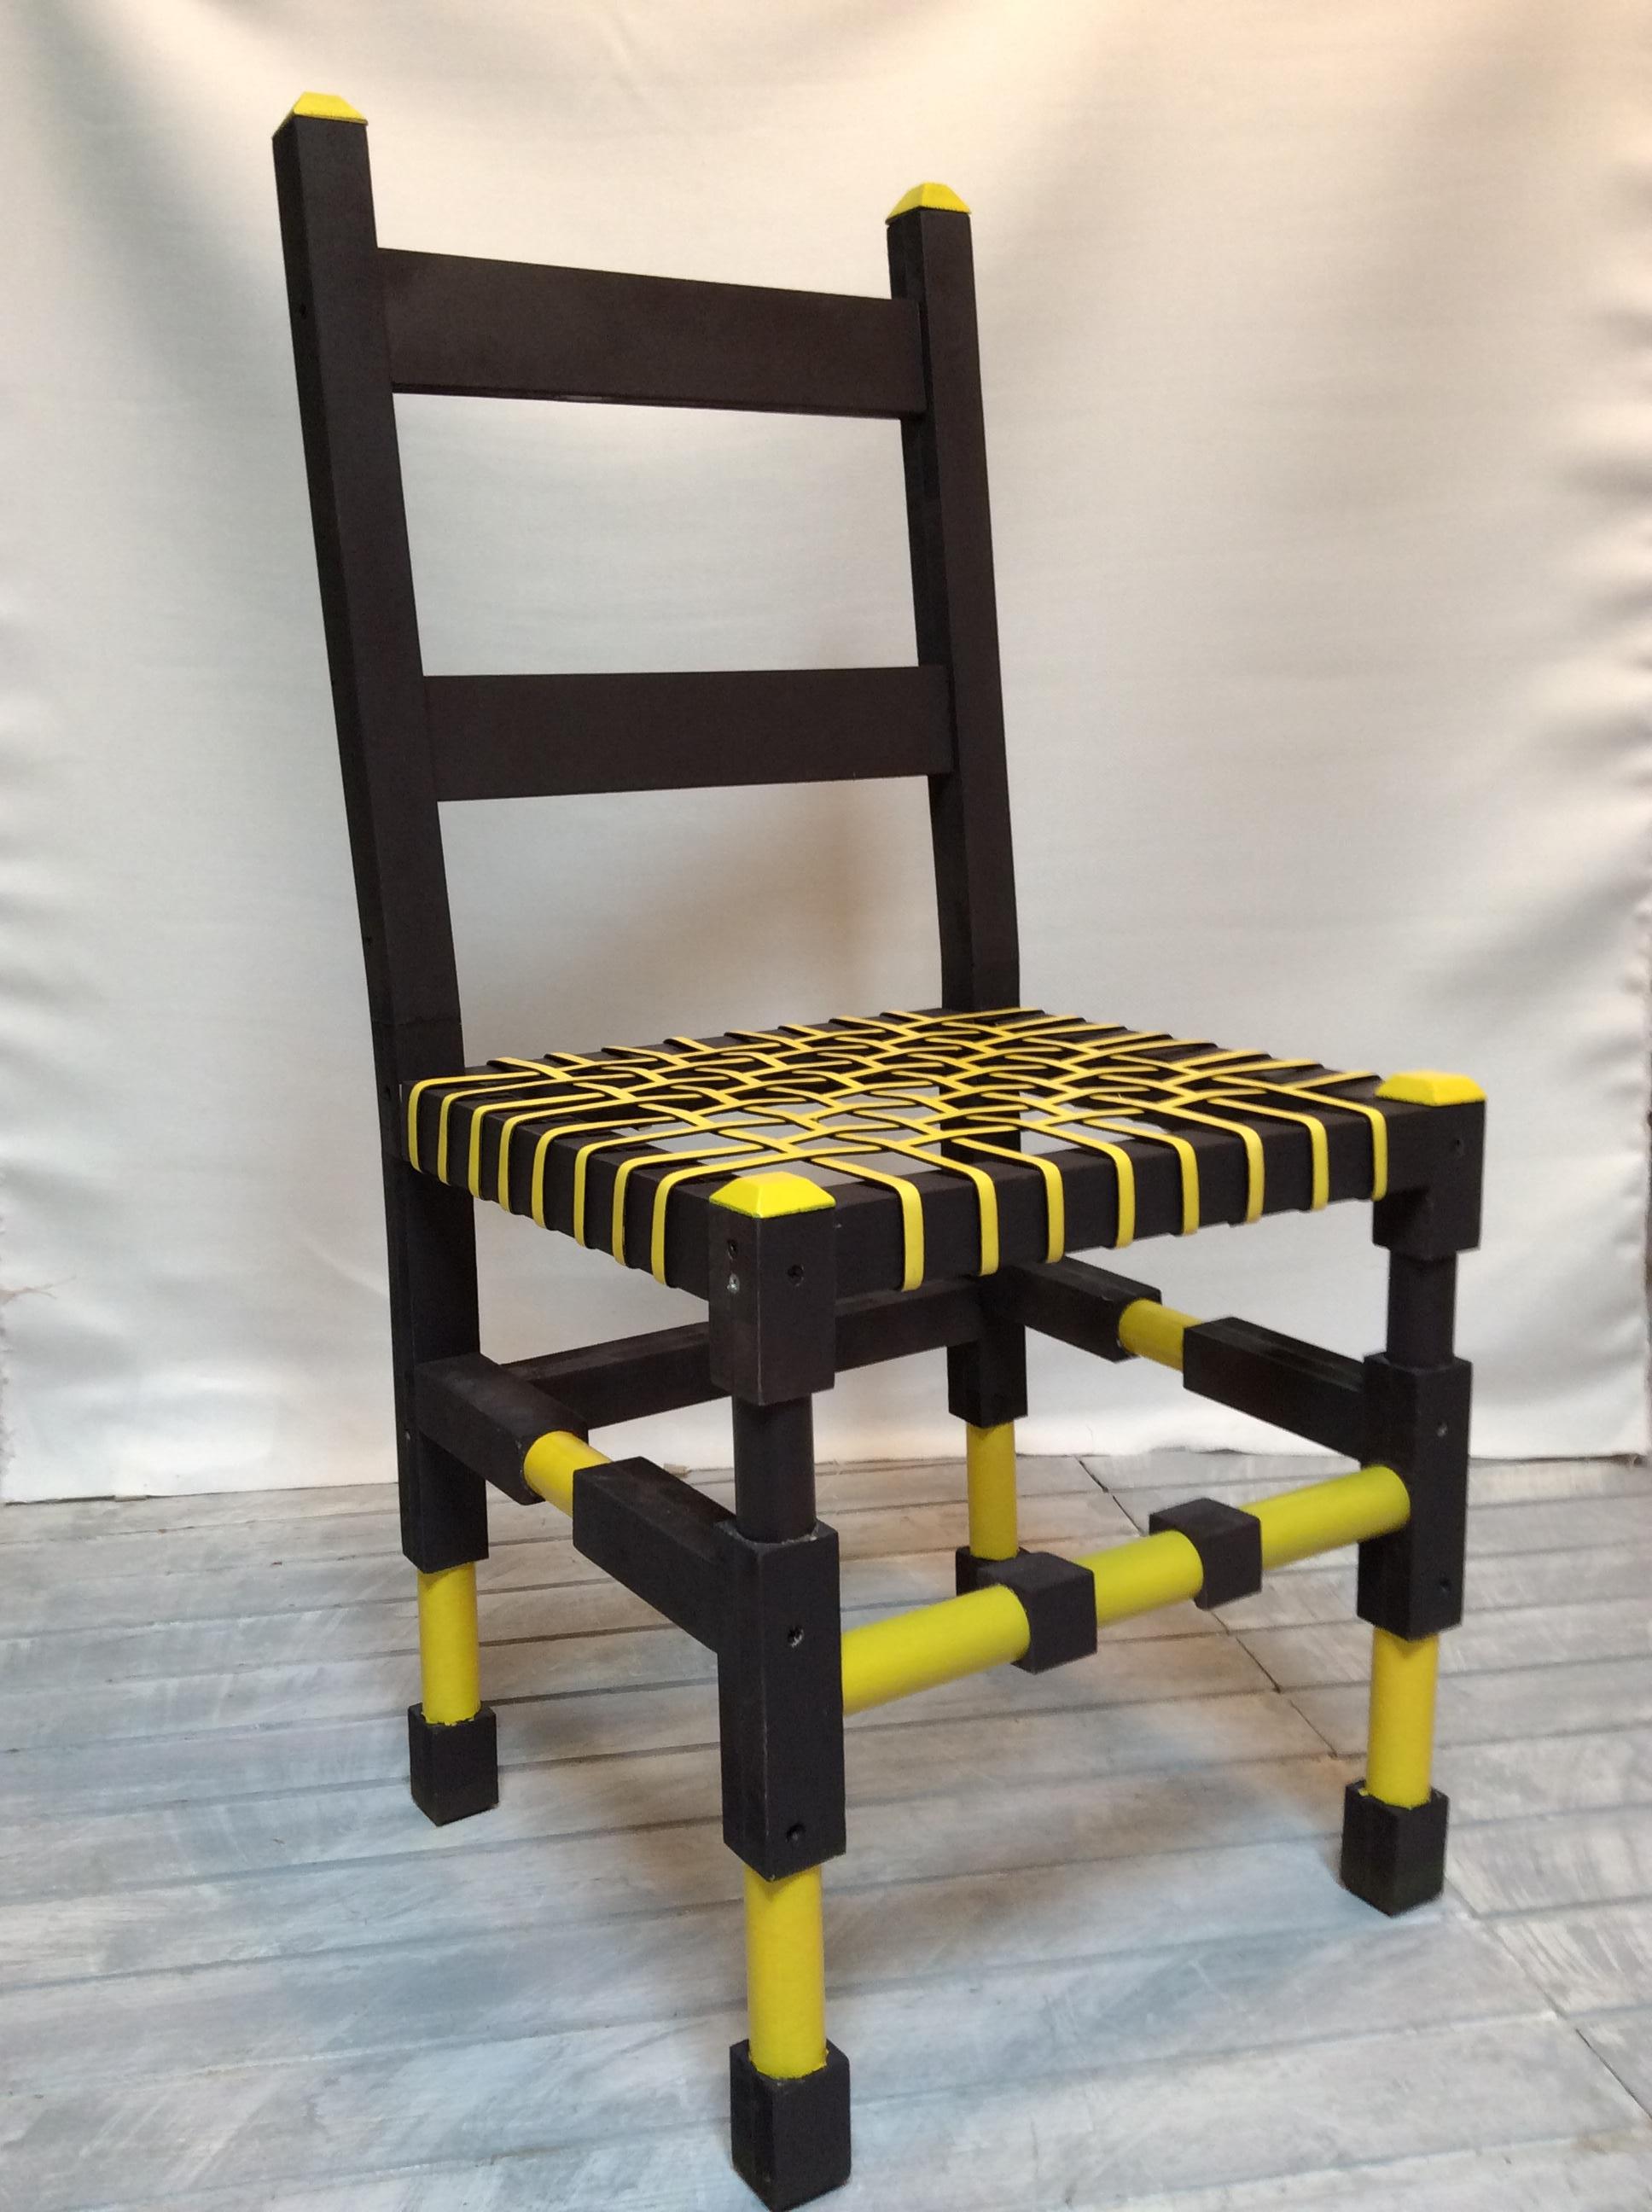 Lego chair by Andrea Giomi
Dimensions: D 43 x W 45 x H 98 cm
Materials: .wood frassino leather.

Andrea Giomi, was born in Castelfiorentino in the province of Florence in
1970. Develops his training and experience in the world of furniture as a